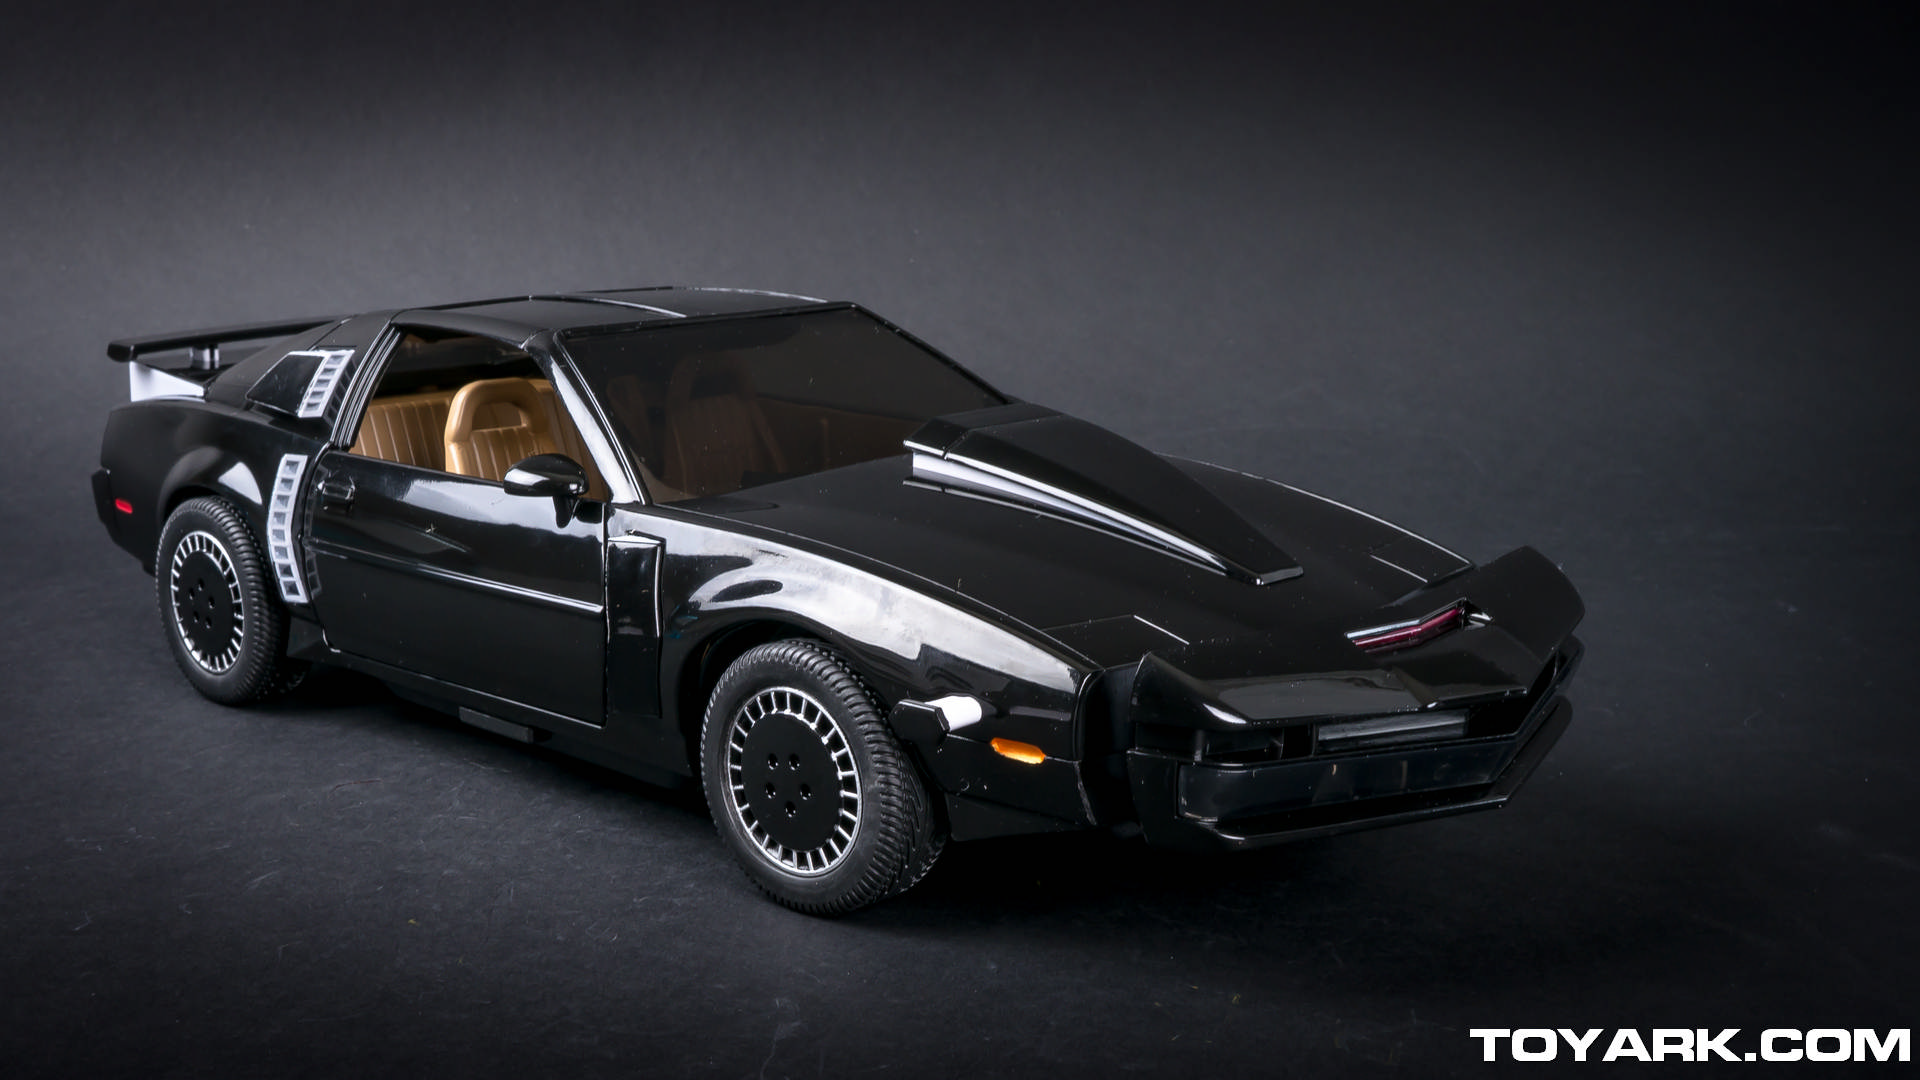 Knight Rider Kitt Super Pursuit Mode 15th Scale Photo Shoot The